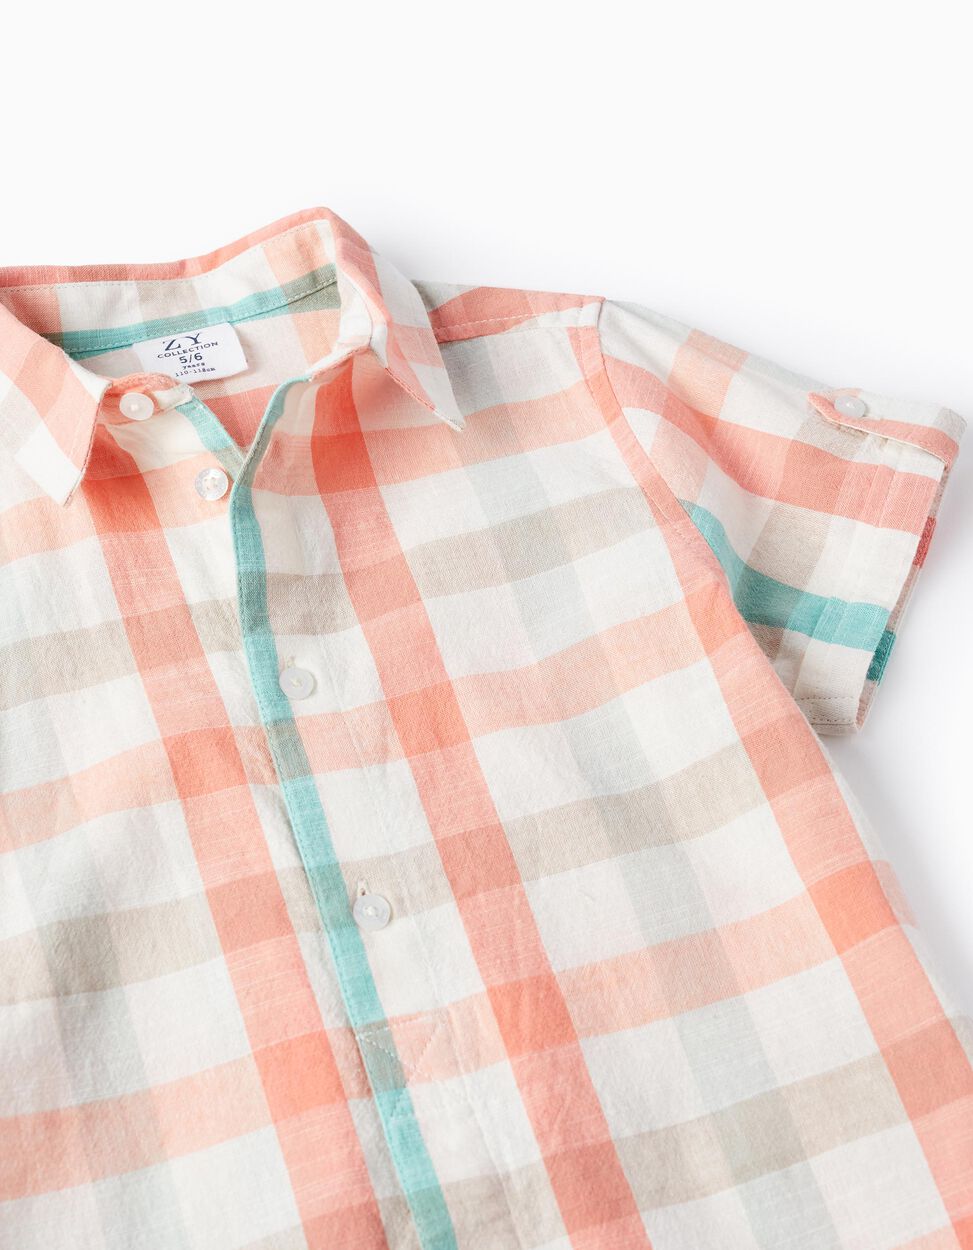 Buy Online Checked Shirt in Cotton for Boys 'B&S', Aqua Green/Coral